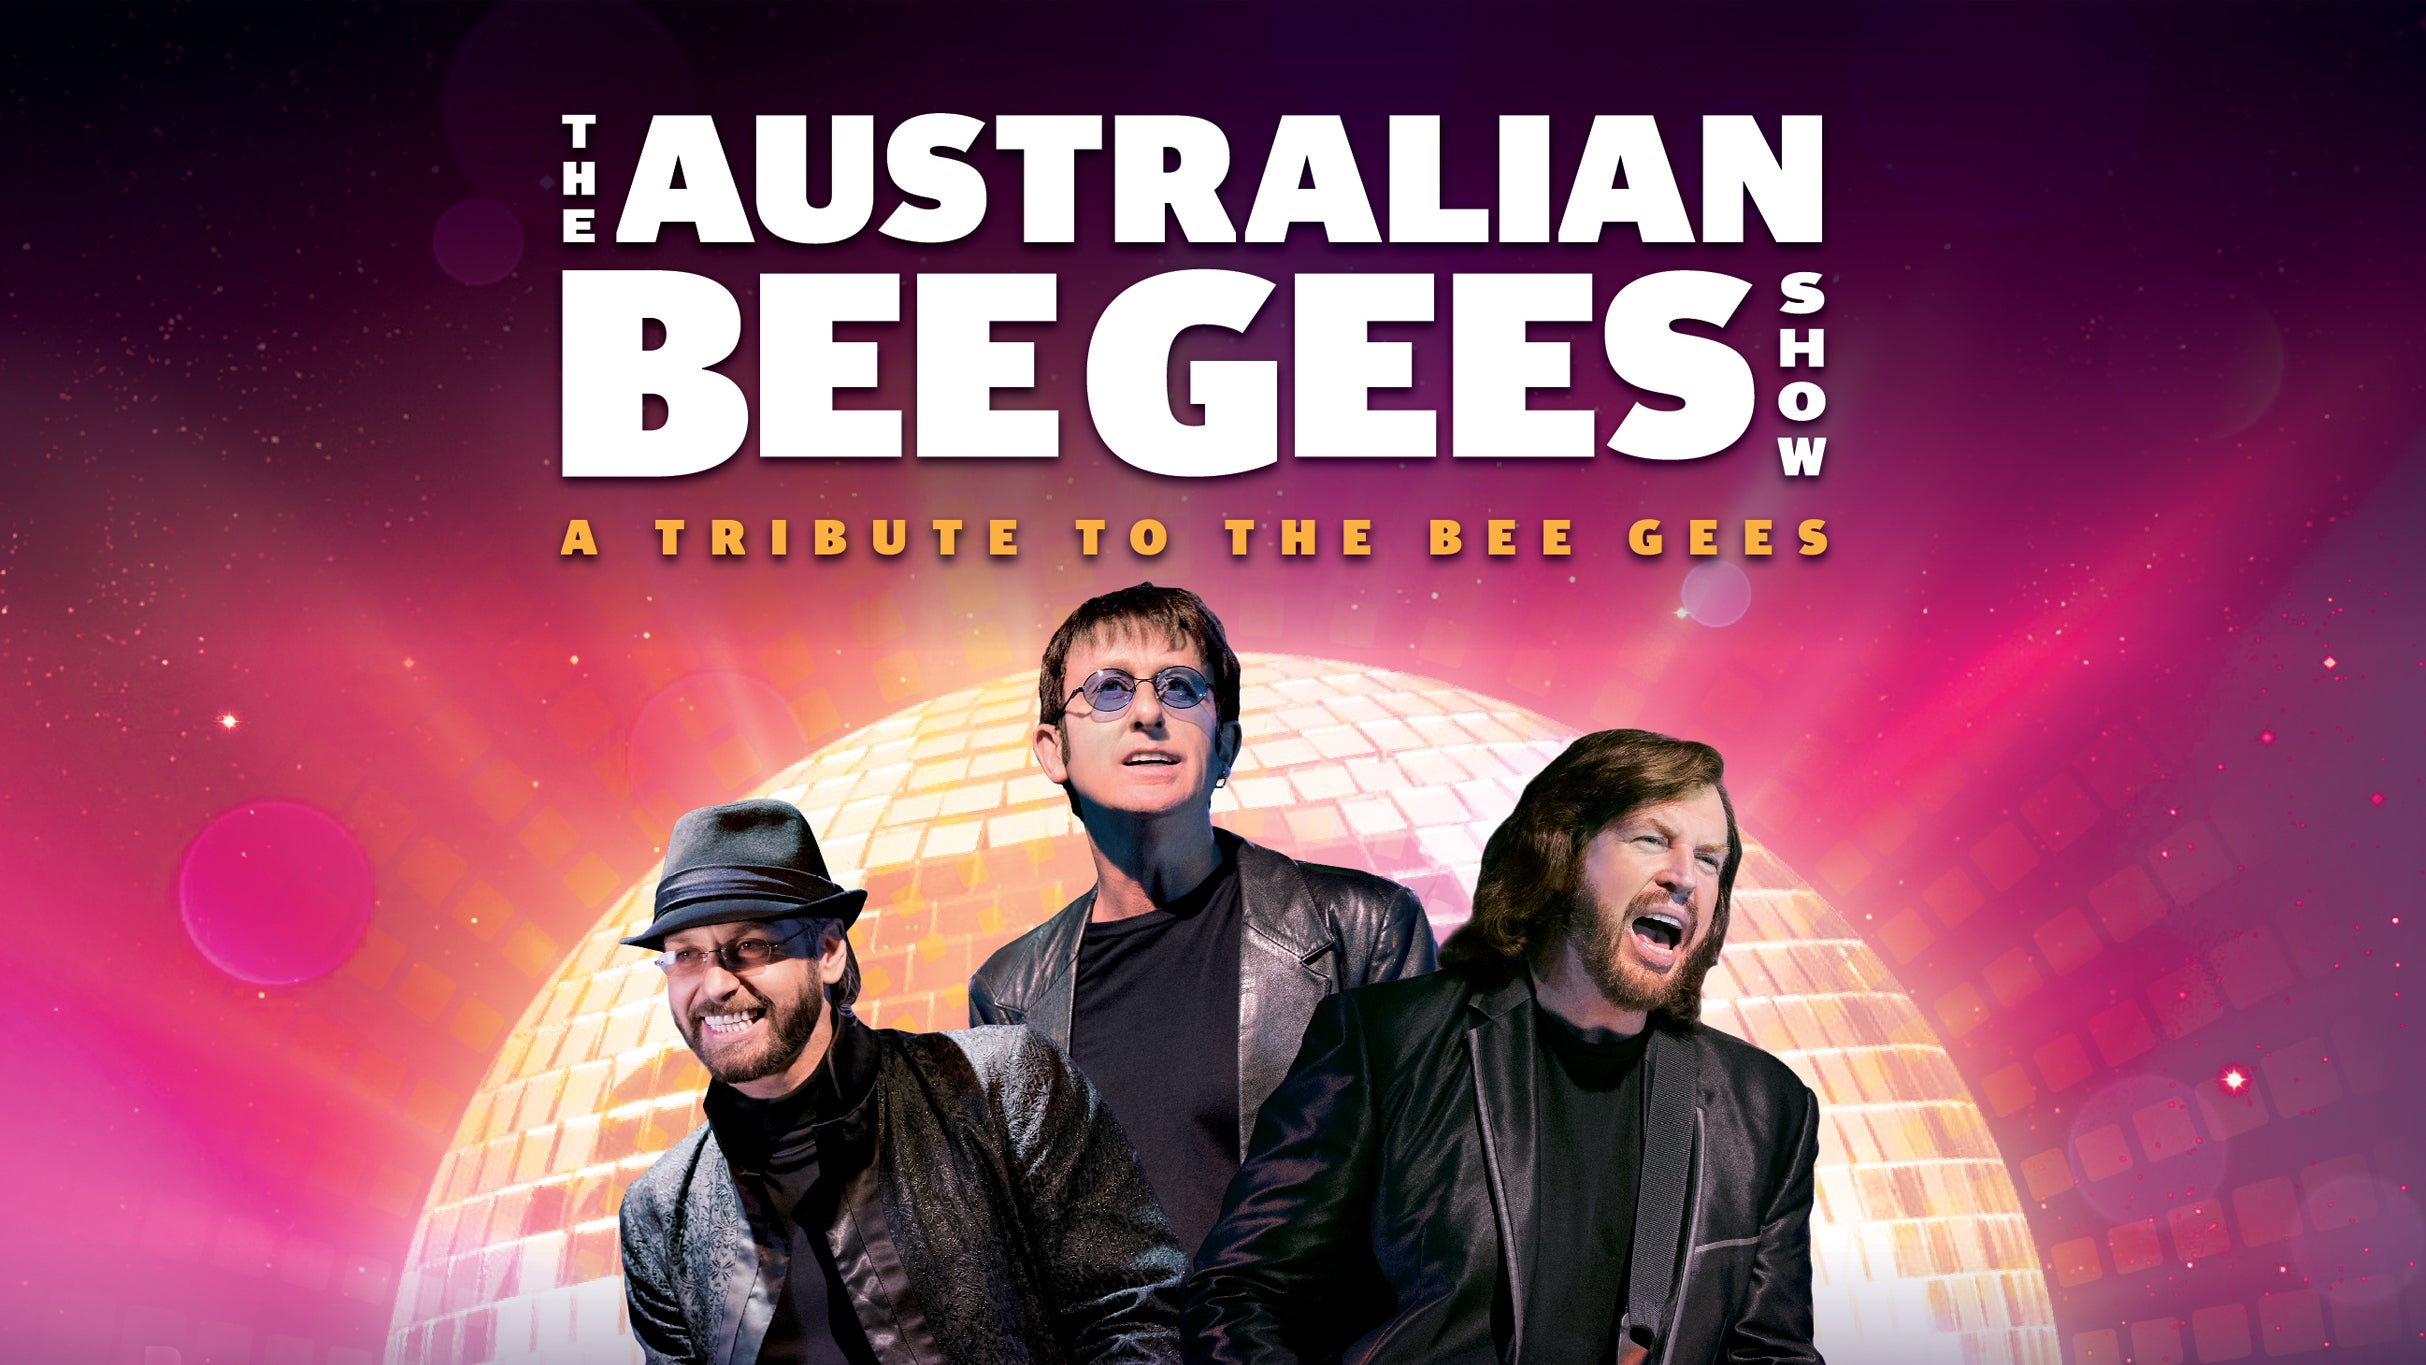 The Australian Bee Gees Show in Québec promo photo for Promo 2 pour 1 « On sort ensemble OSE » presale offer code